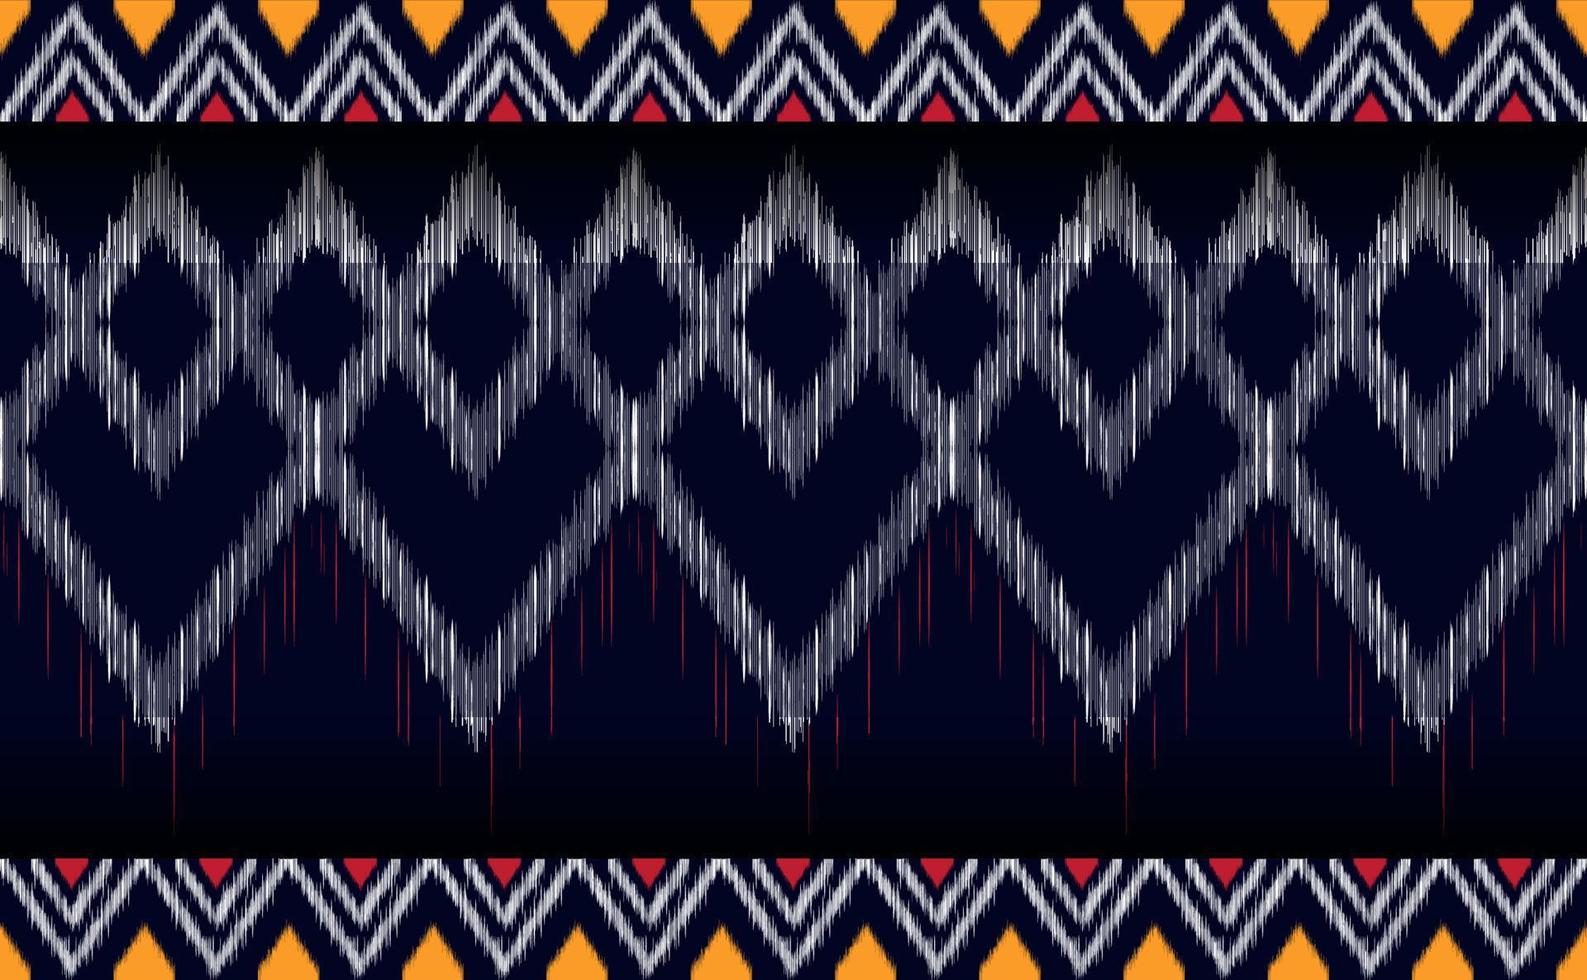 Geometric ethnic pattern, Embroidery continuous tribal background, Graphic fabric abstract vector design.